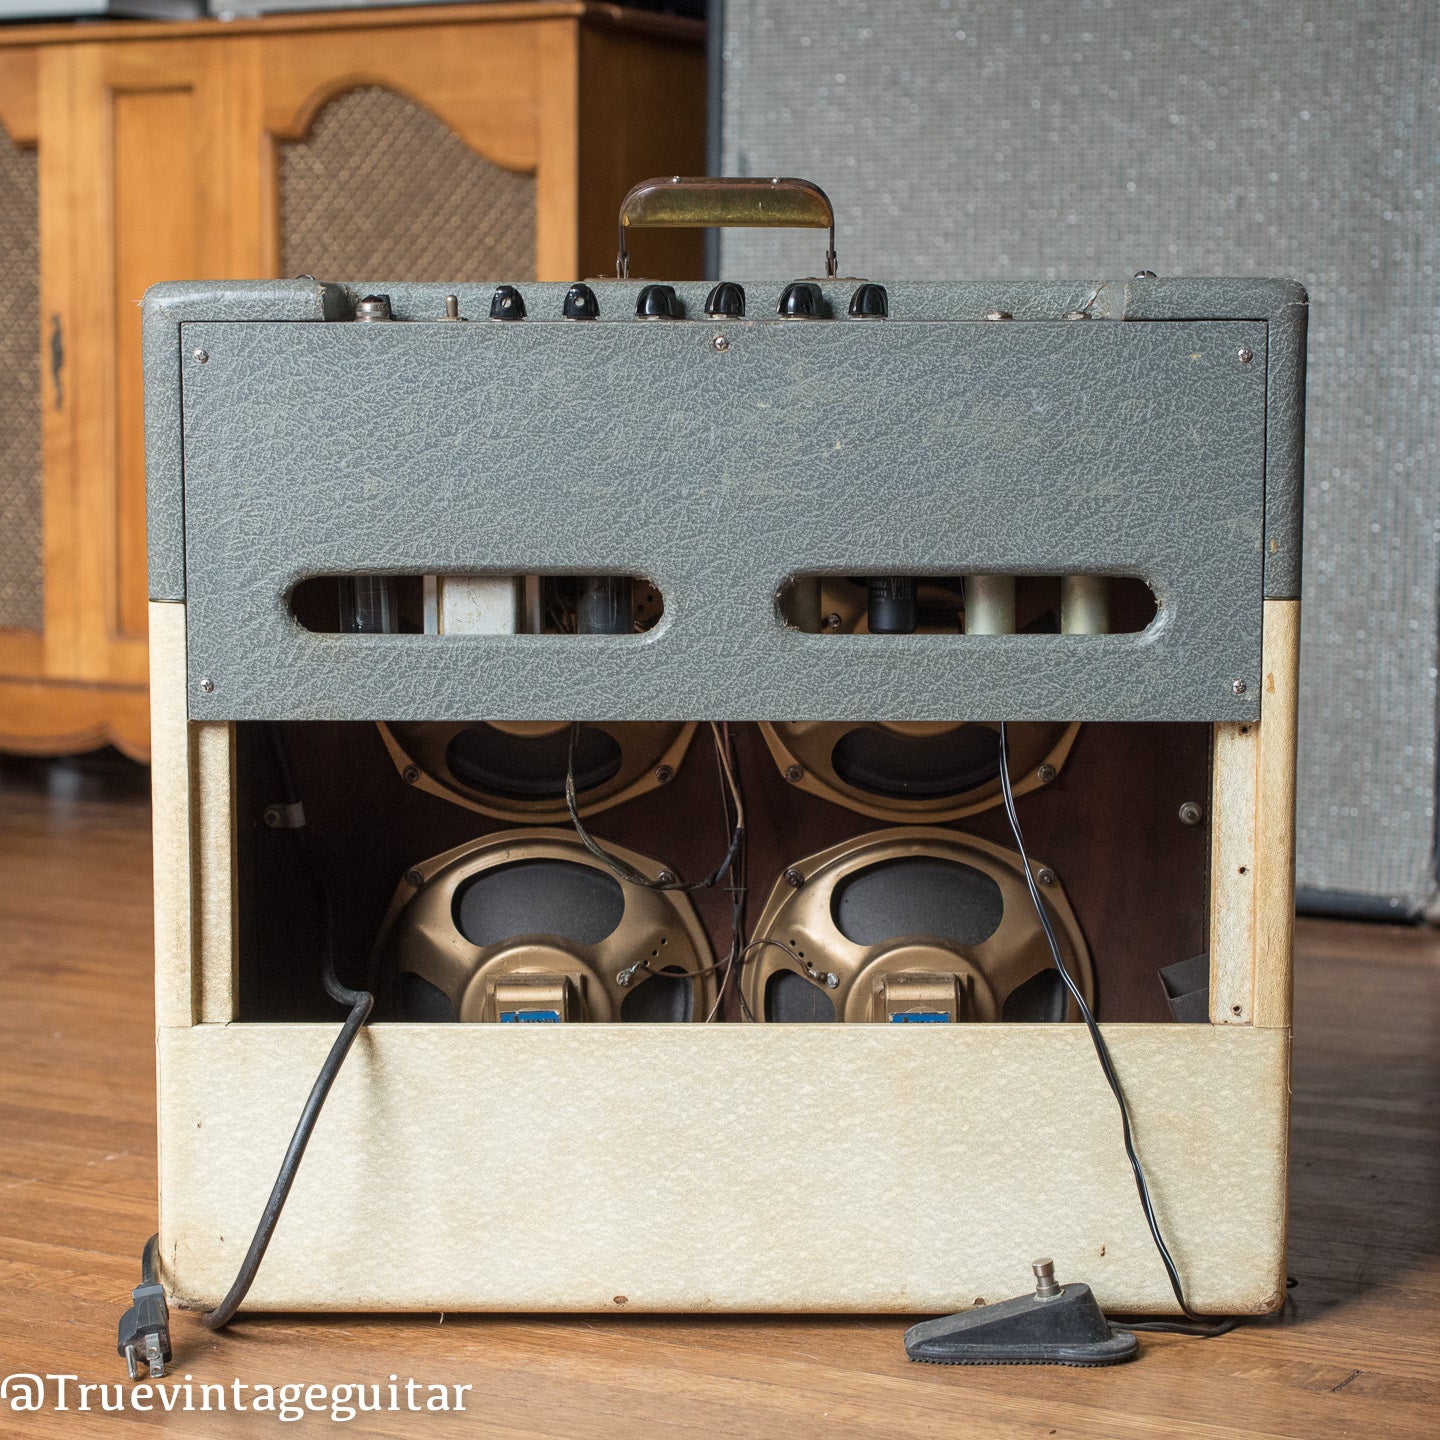 1950s Gibson amp four speakers